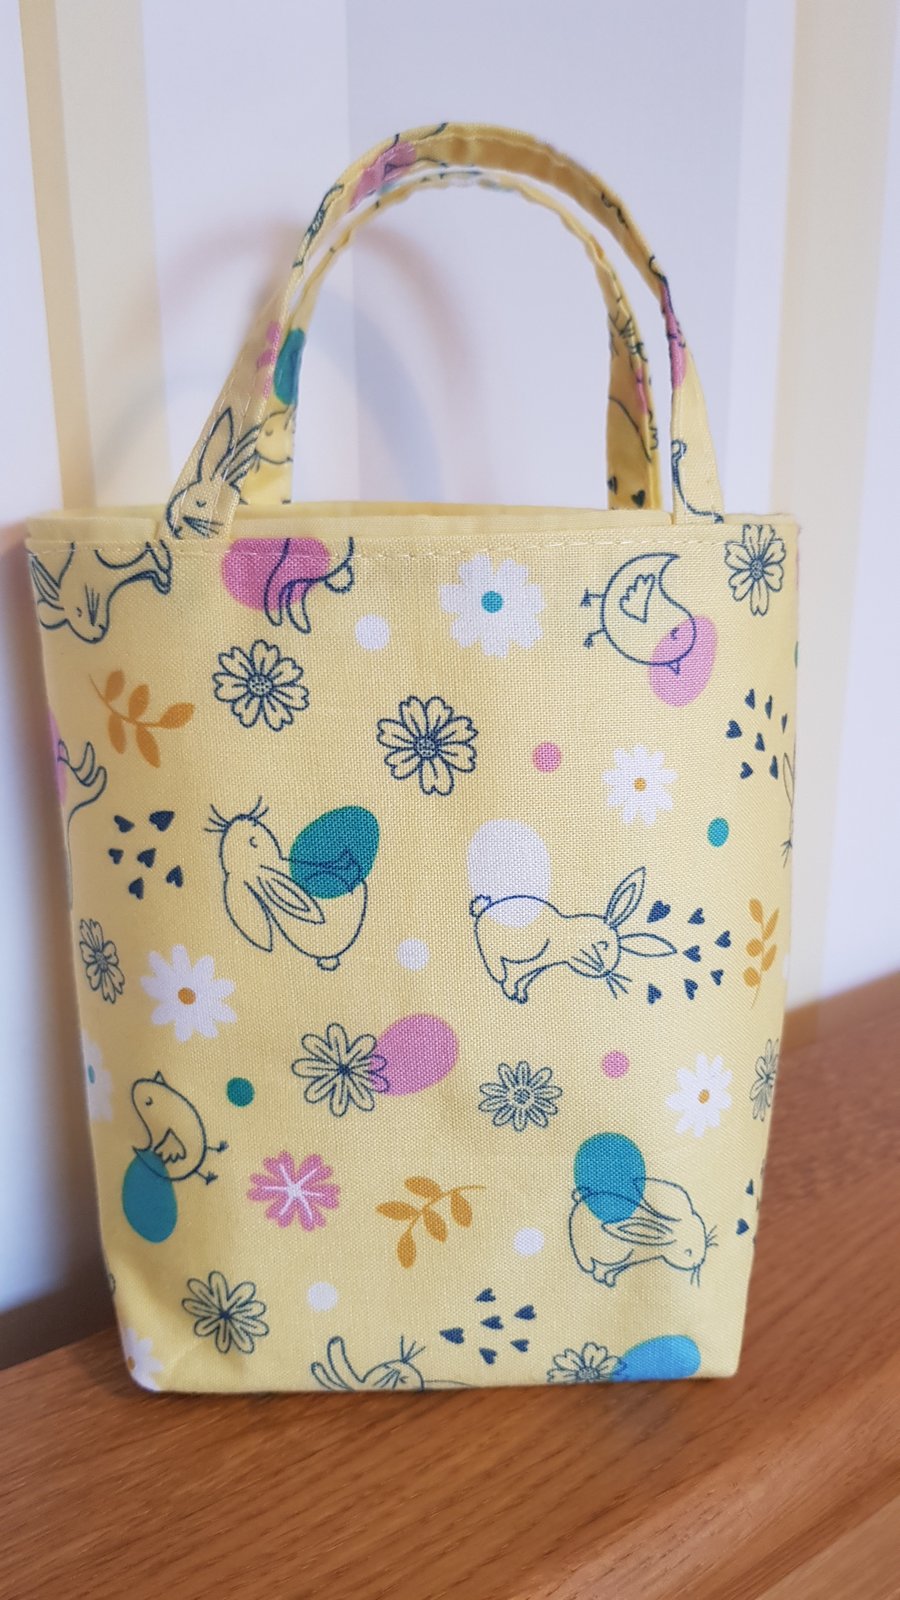 Mini Easter gift bag: yellow with bunnies